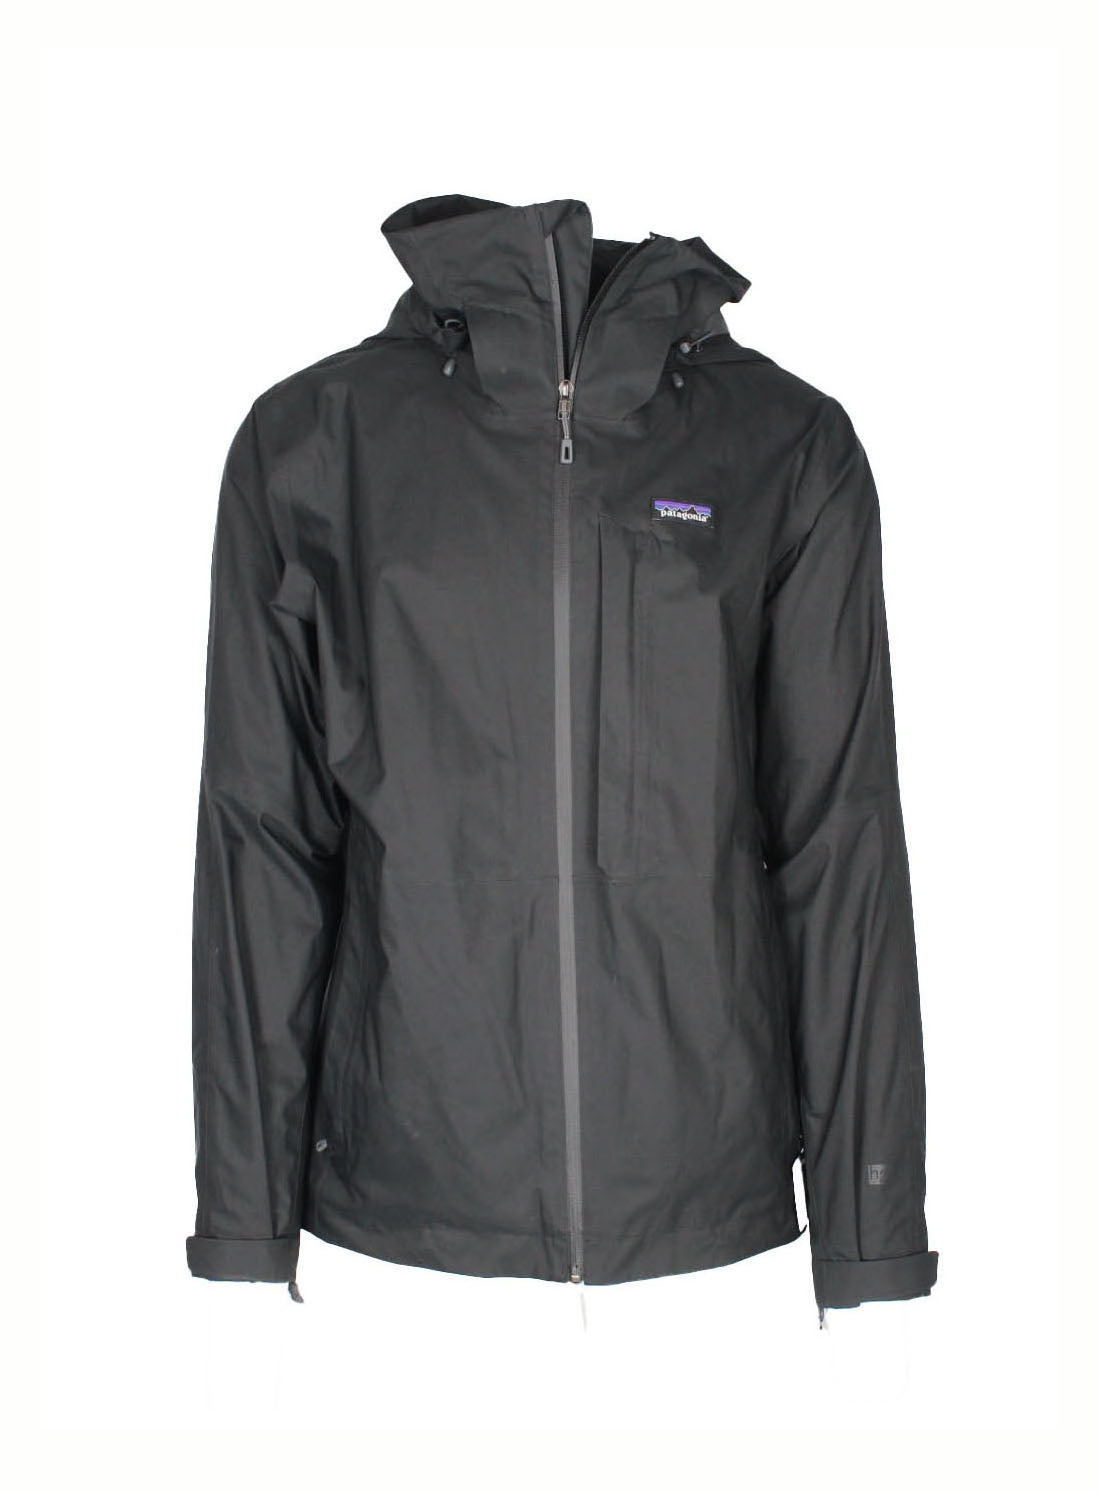 front view of patagonia black zip up ski jacket. features ‘patagonia’ logo tag at left breast, side zip hand pockets, left breast zip pocket, underarm zip vents, velcro at cuffs, drawstring at hem, fully mesh lined, inner mesh pockets, and optional zip/snap on hood with drawstring at collar.